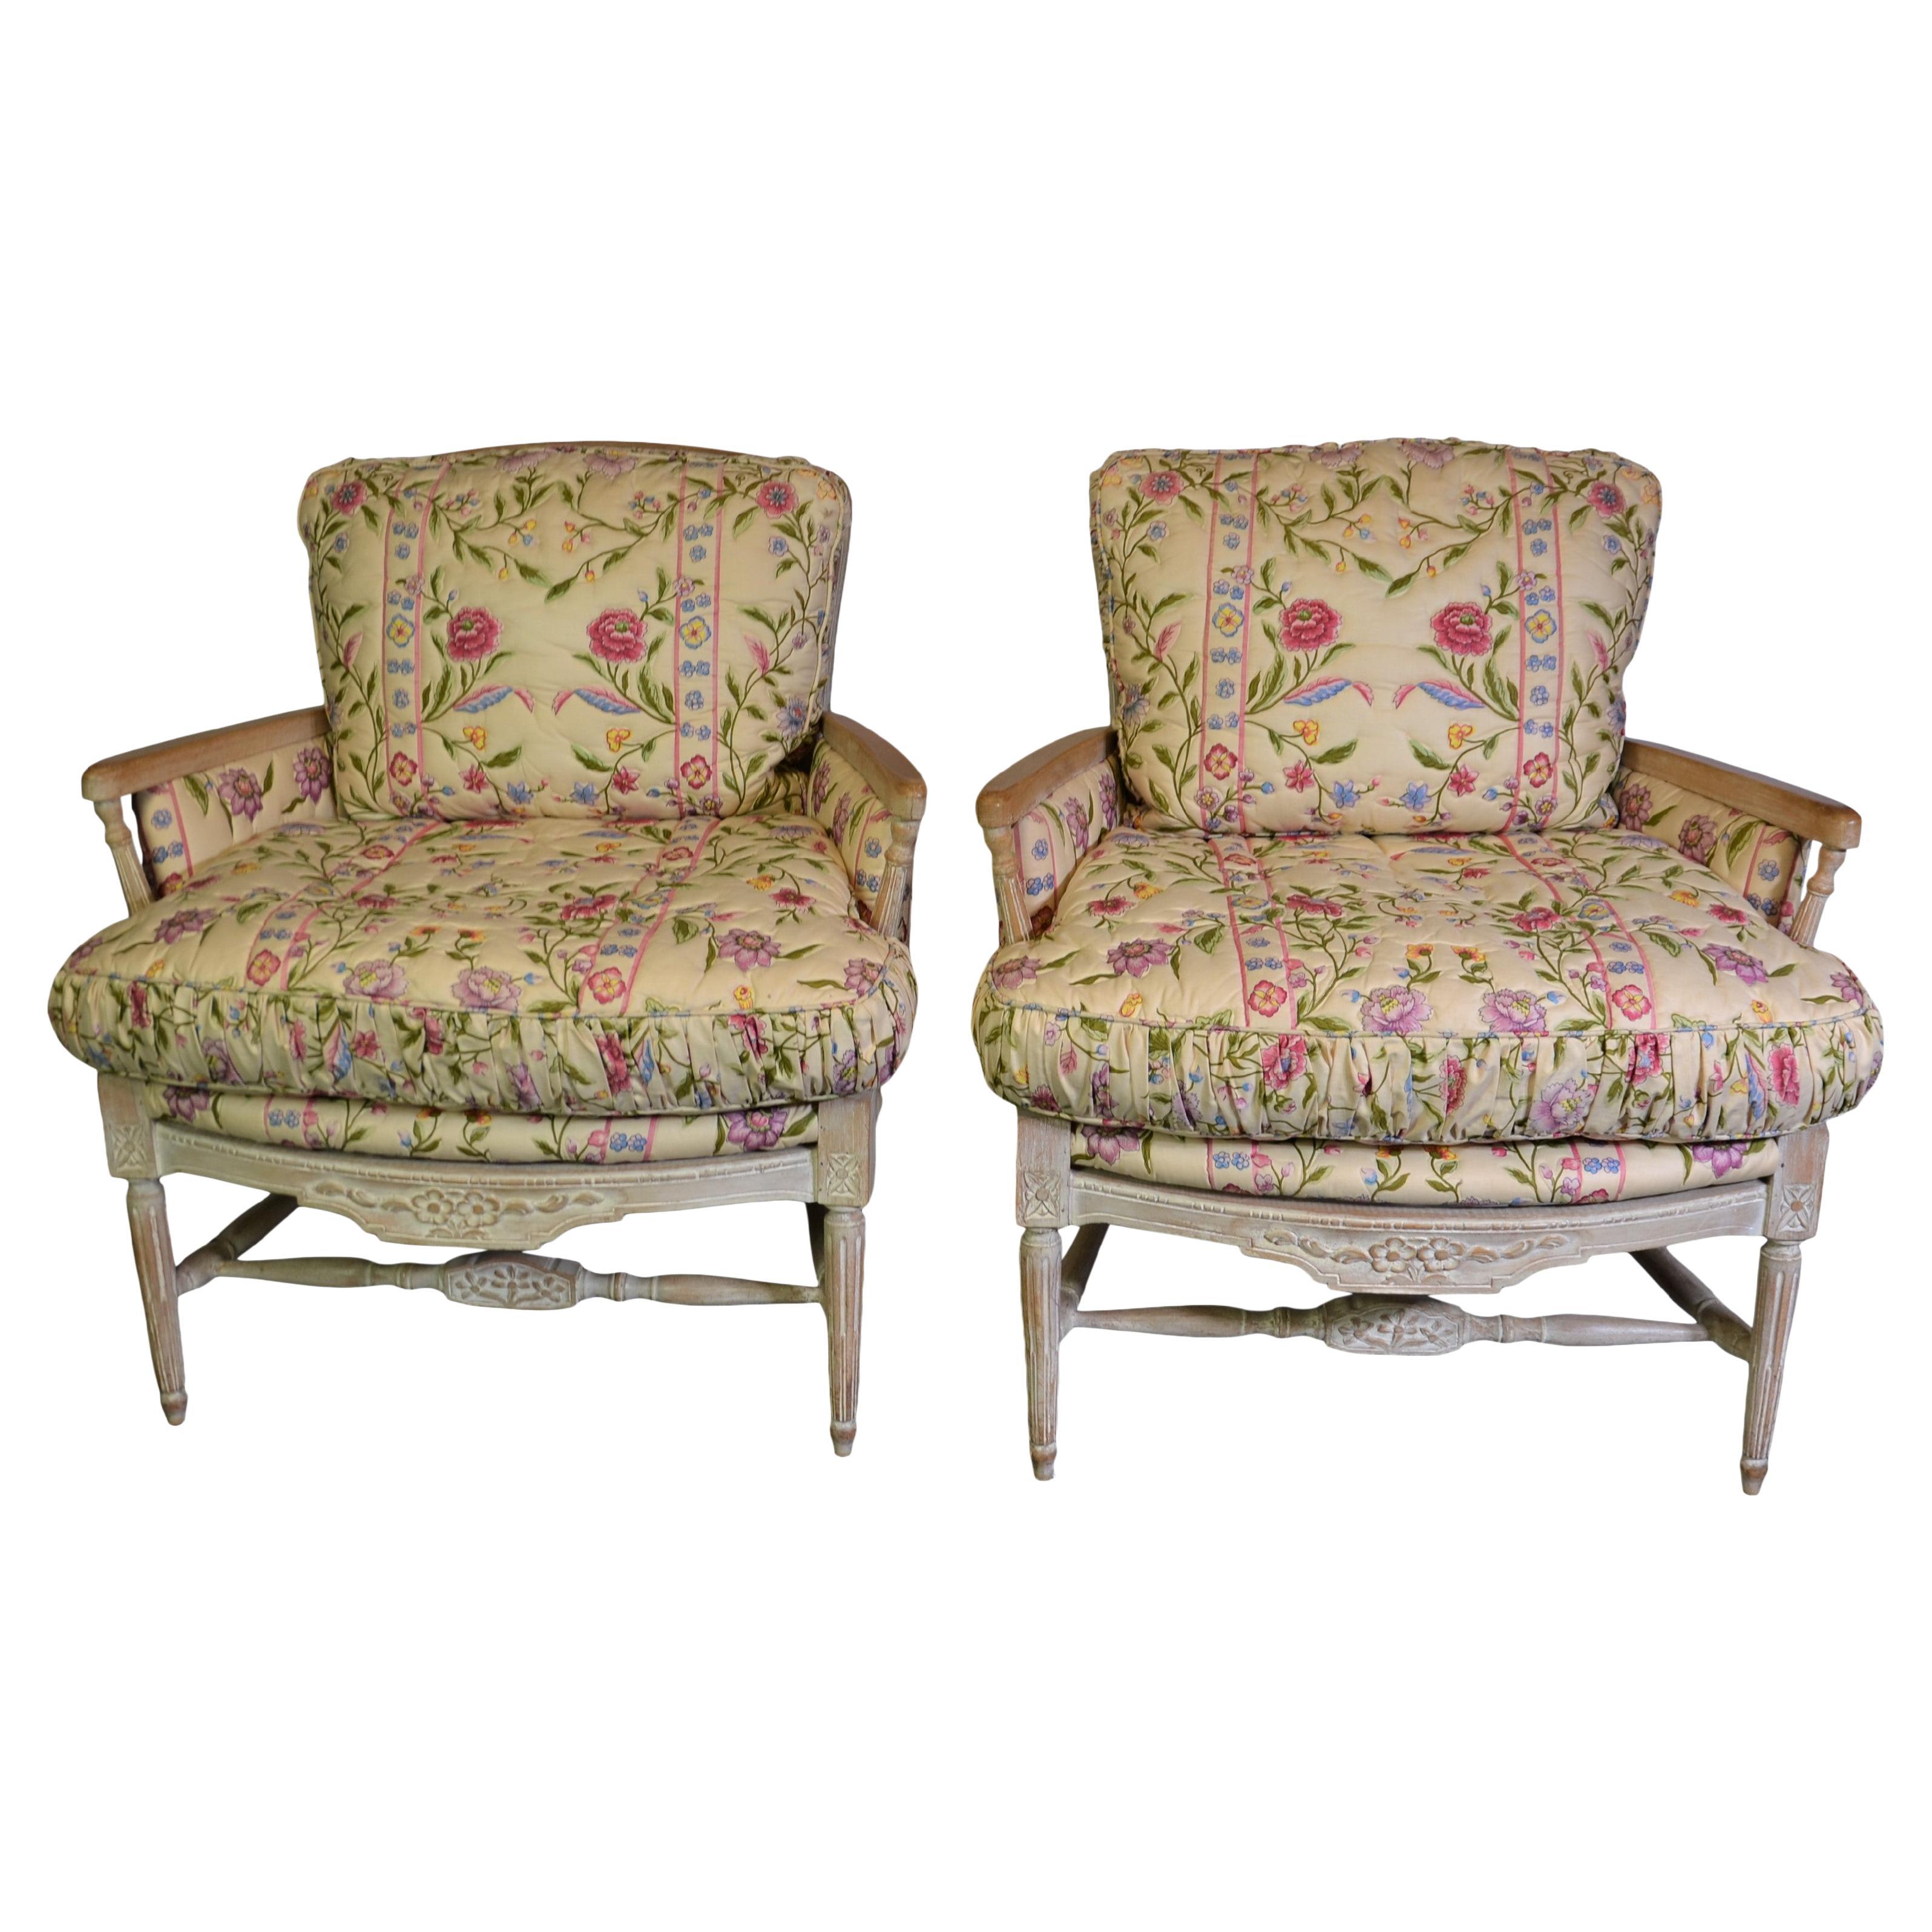 Pair of Louis xvi style ladder back armchairs. The chairs are covered in toile fabric, and the loose cushions are down-filled.